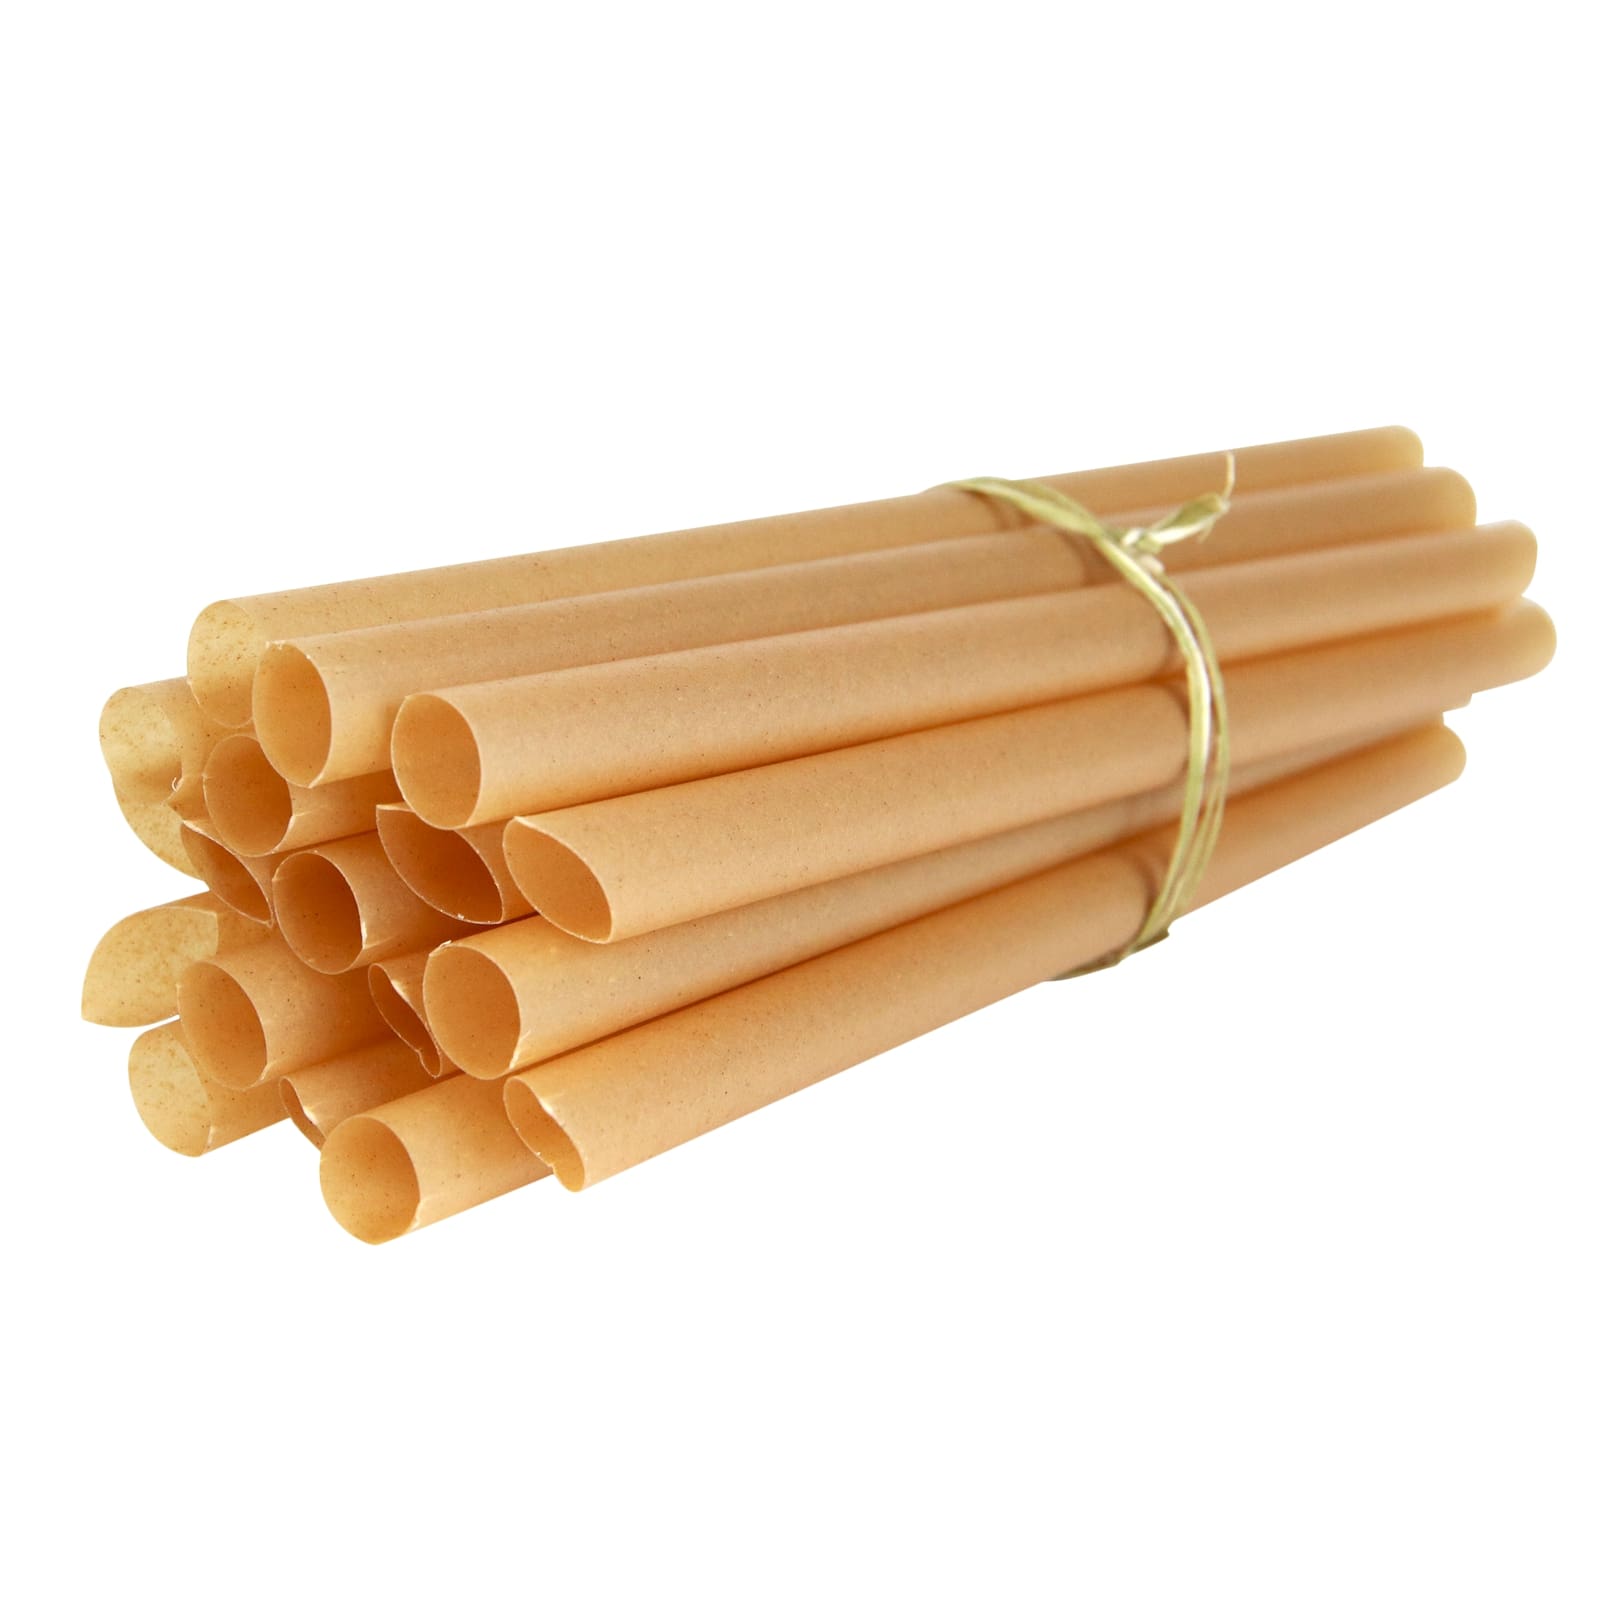 Sugarcane Straws by Equo | Get it at The Green Collective